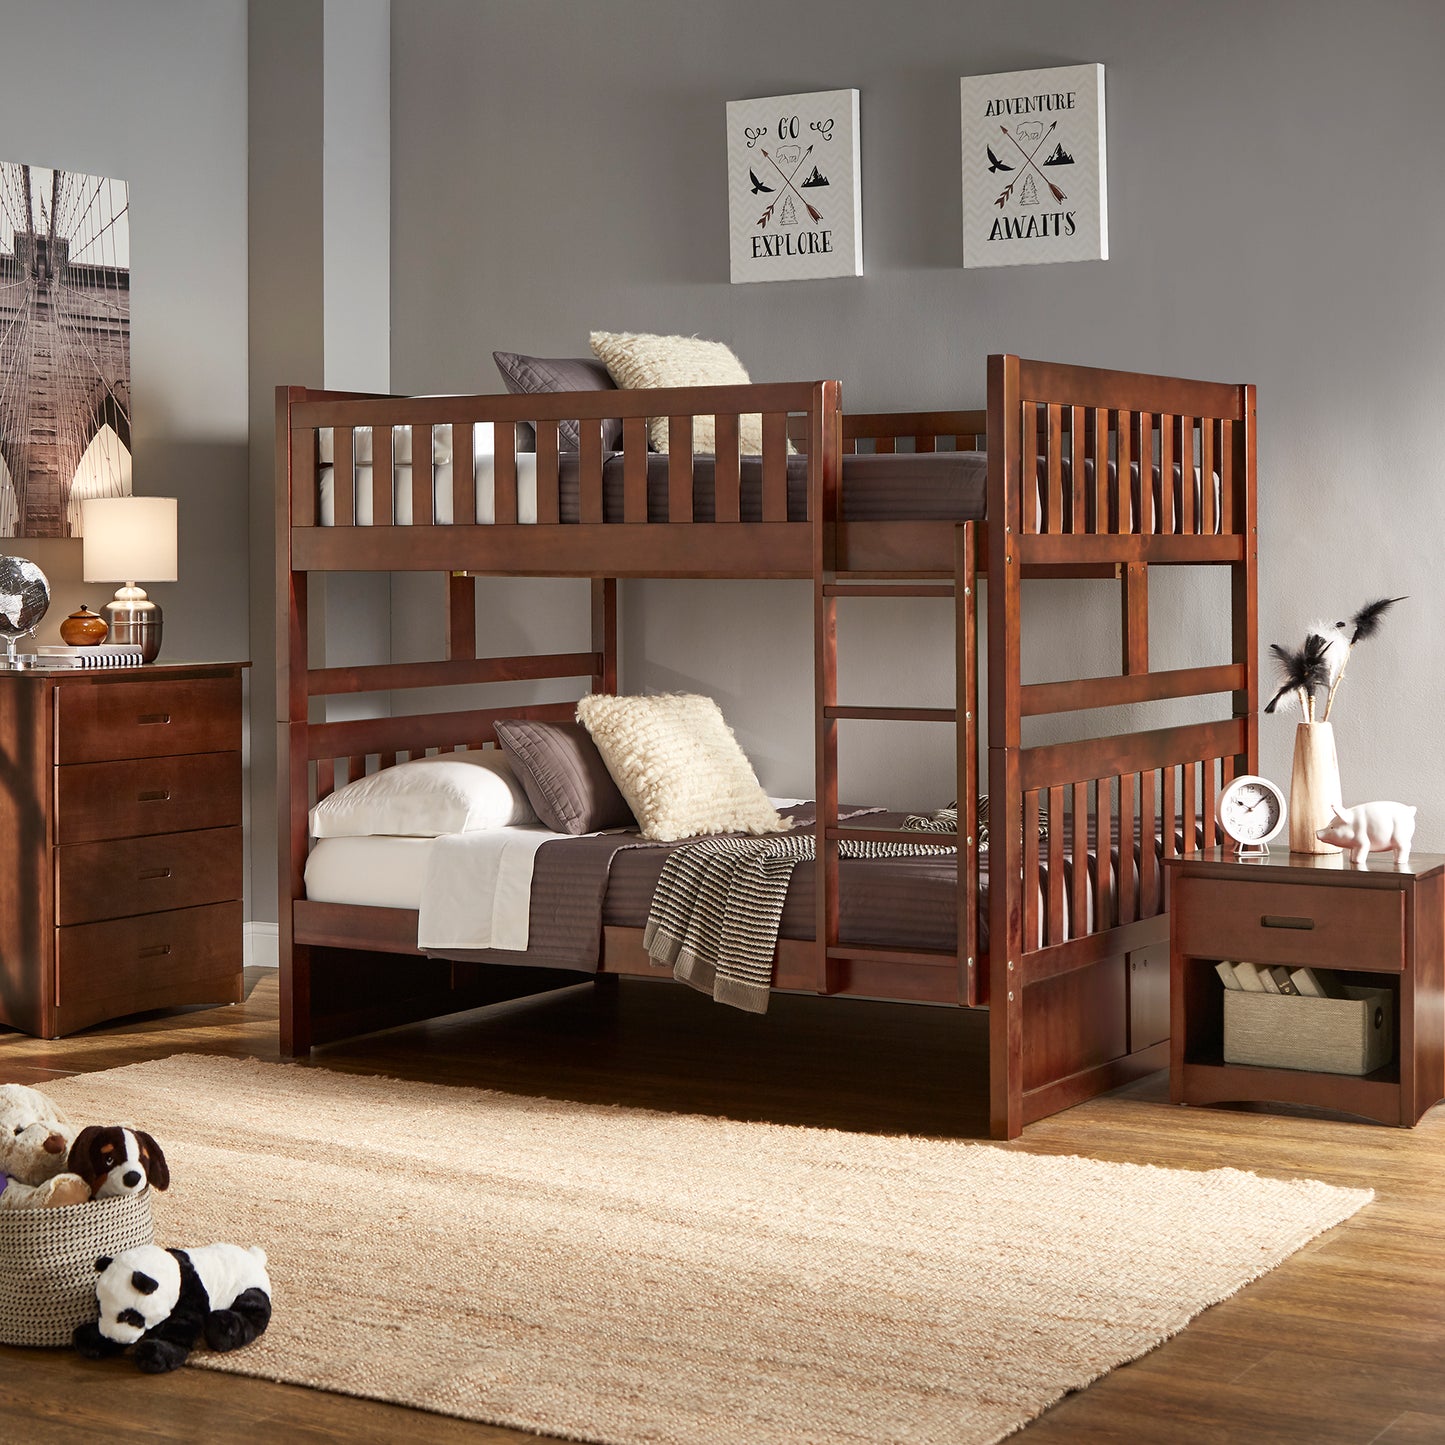 Dark Cherry Finish Kids' Bunk Bed - Full over Full, Bunk Bed Only